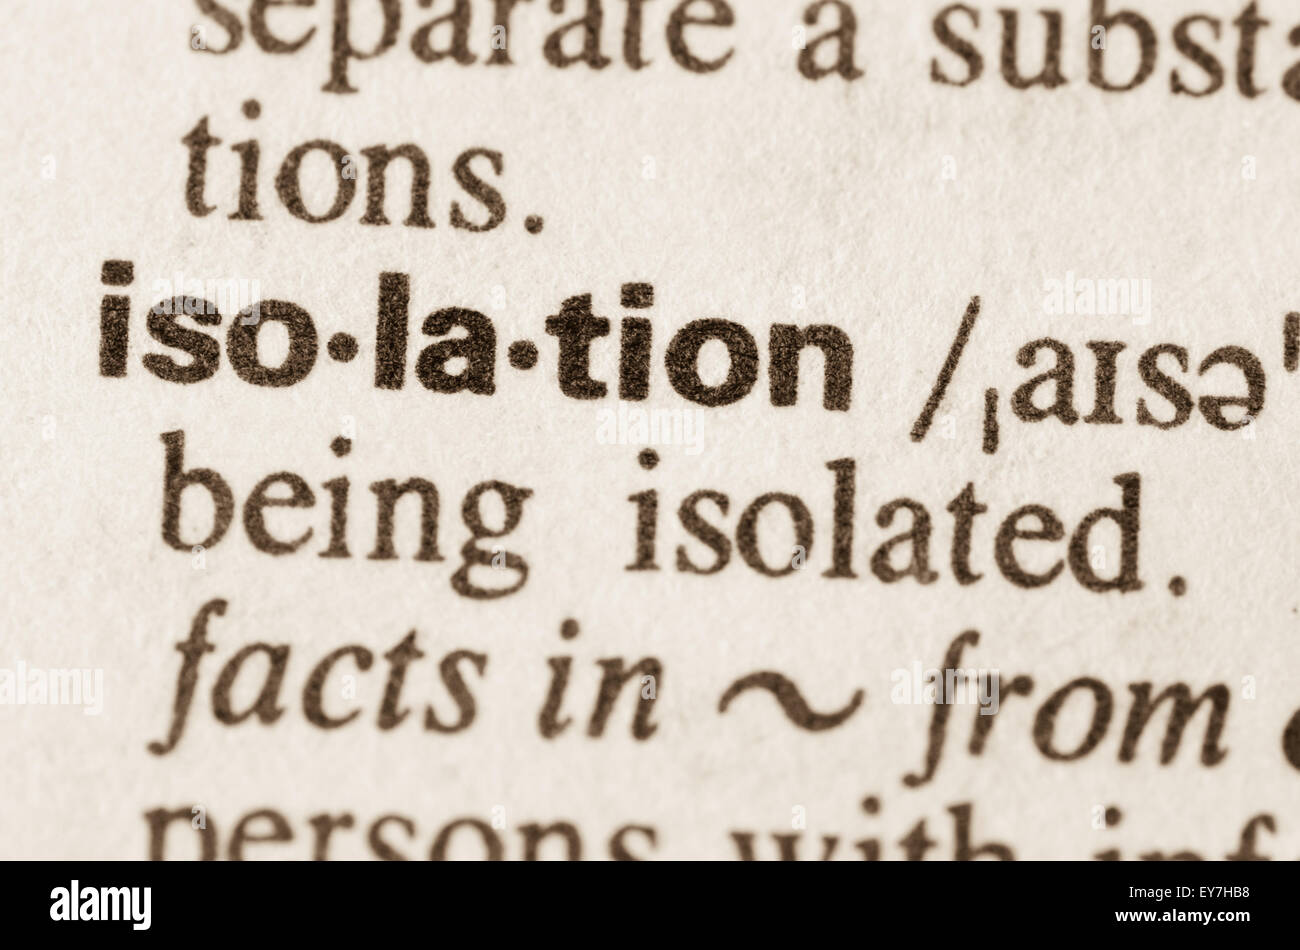 Definition of word isolation in dictionary Stock Photo